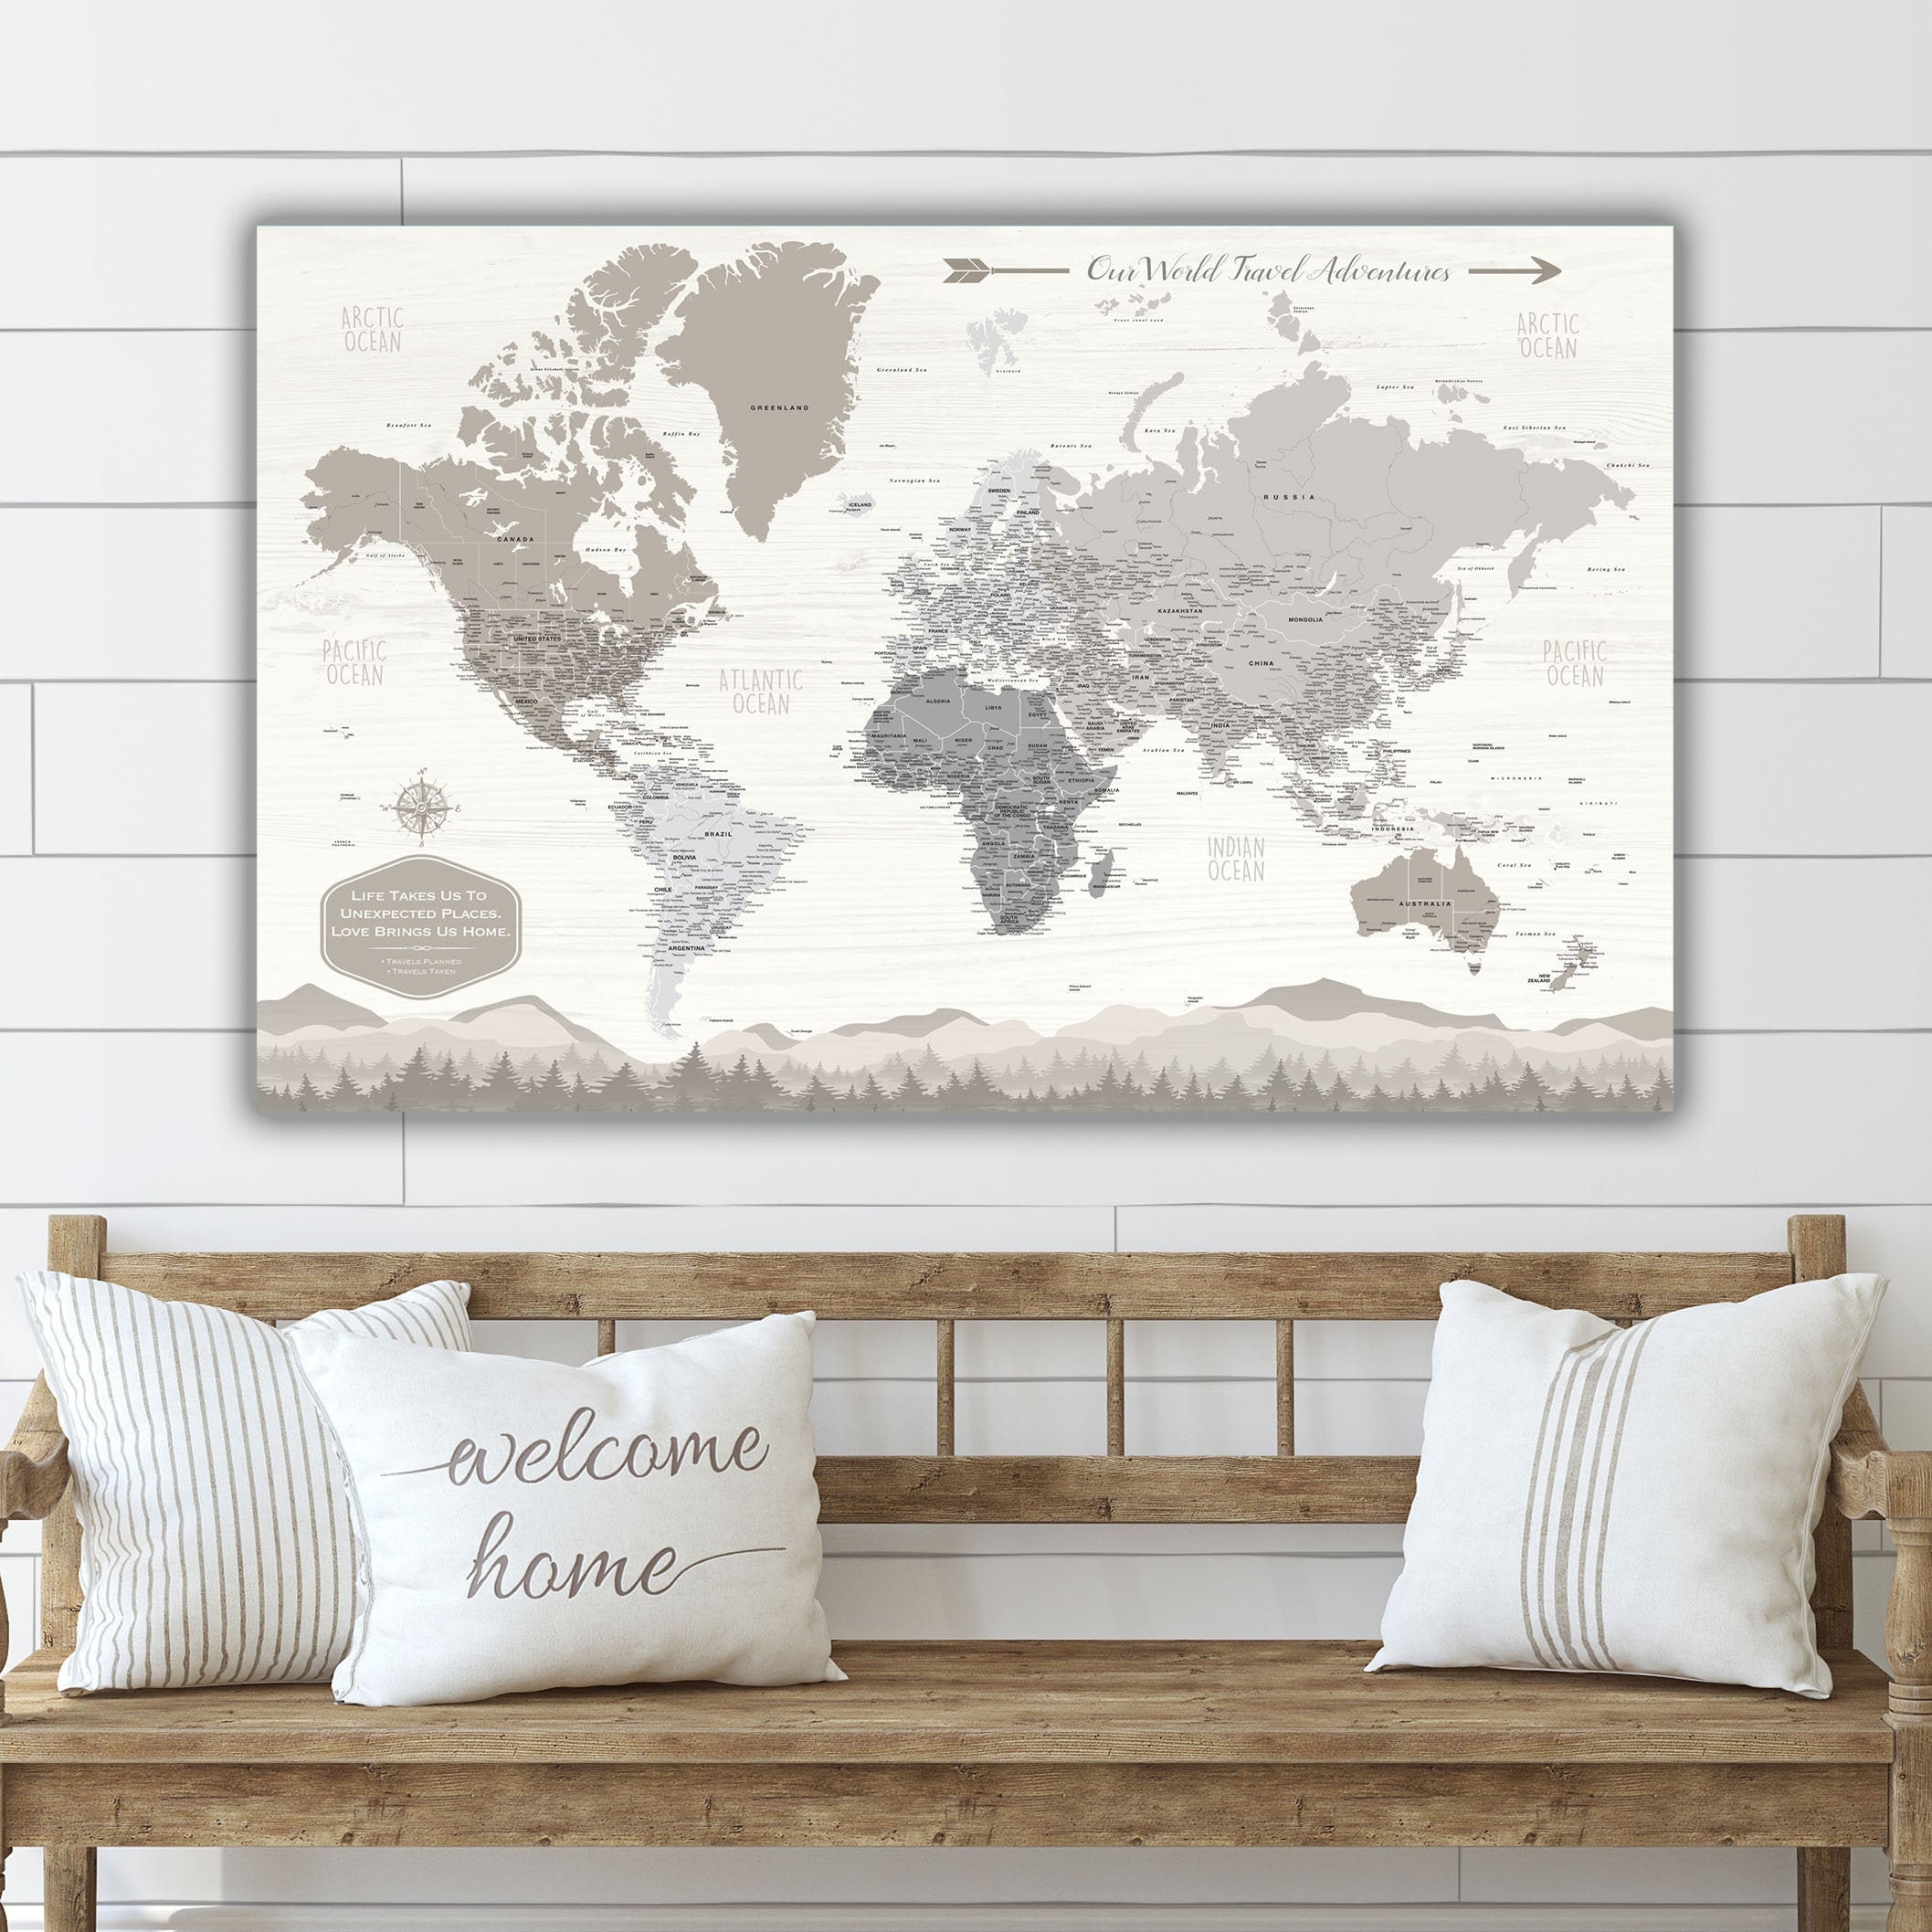  Personalized World Map Pin Board, Modern Wall Art, Framed Push  Pin Map, Black and White, Best Gift for Travellers : Office Products